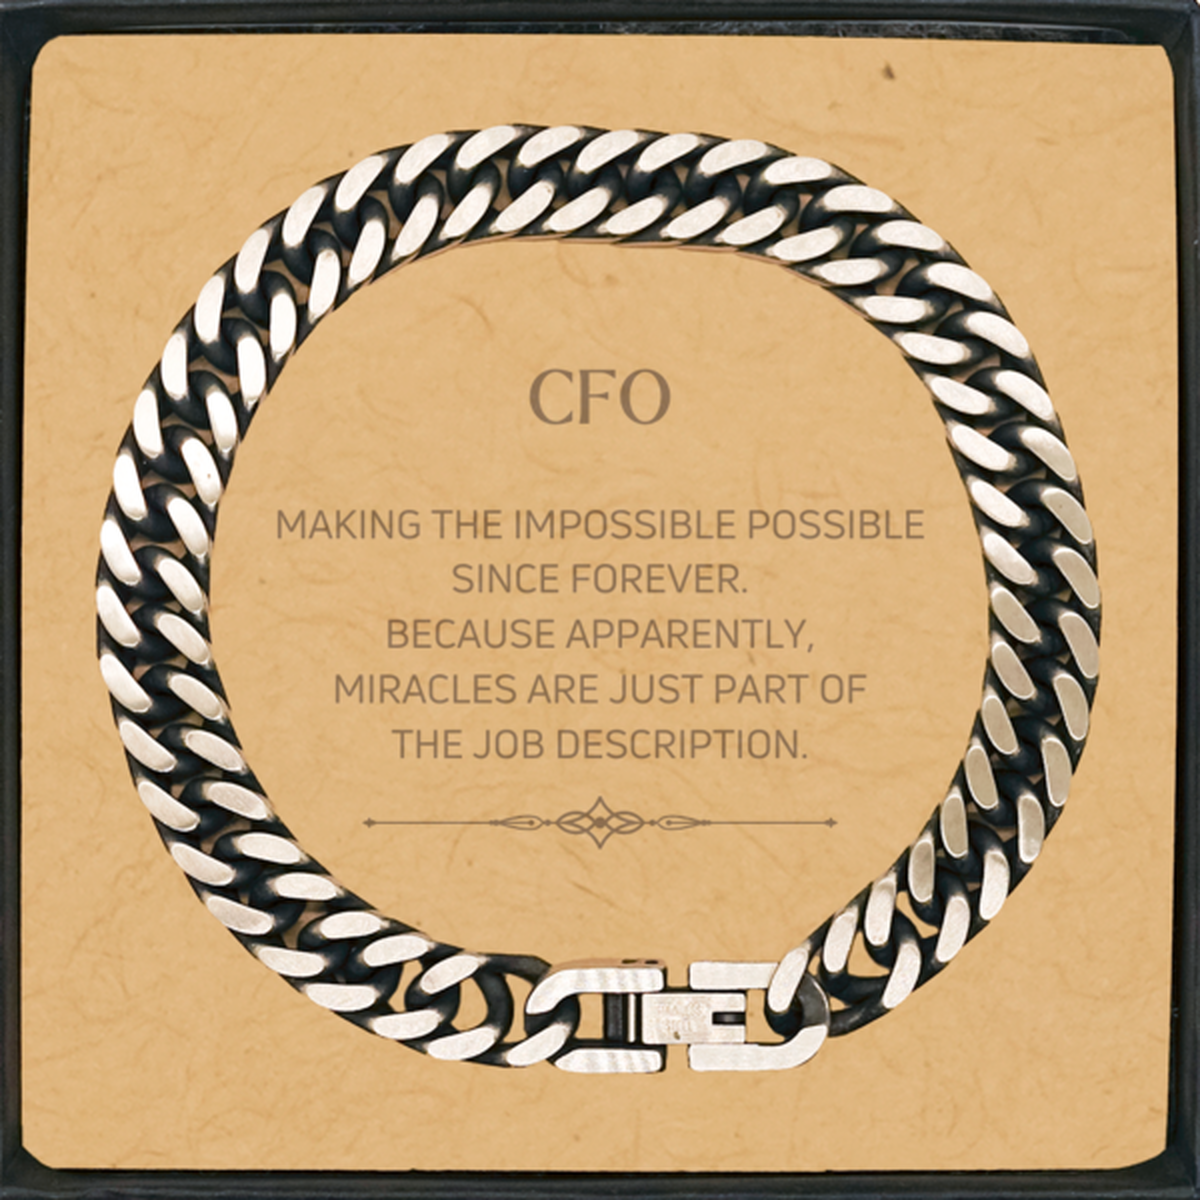 Funny CFO Gifts, Miracles are just part of the job description, Inspirational Birthday Cuban Link Chain Bracelet For CFO, Men, Women, Coworkers, Friends, Boss